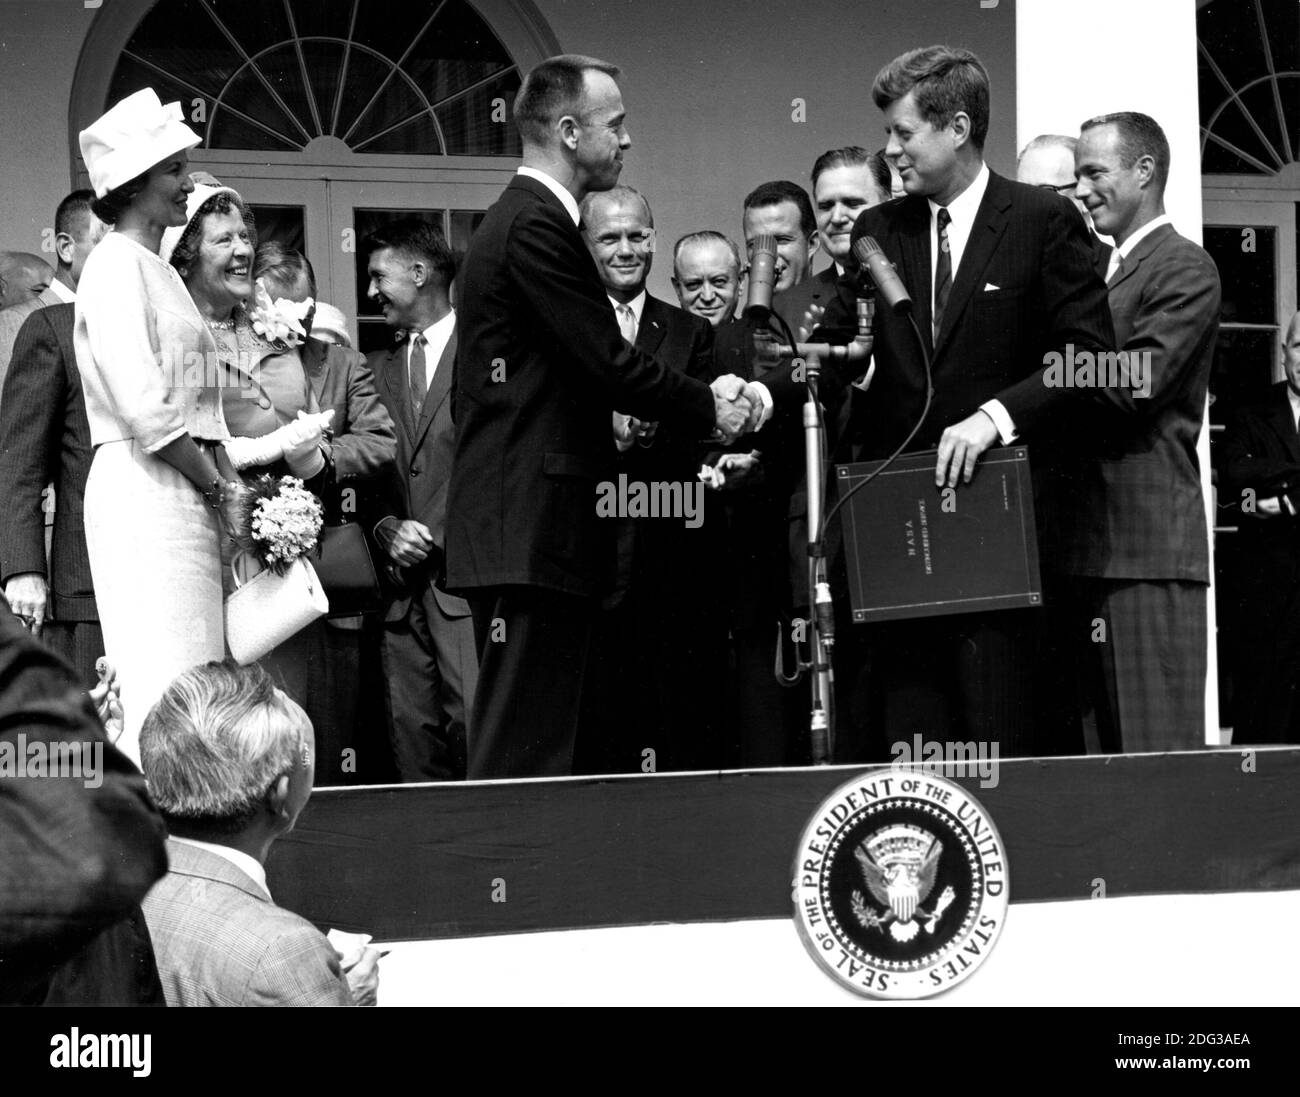 United States President John F. Kennedy congratulates astronaut Alan B. Shepard, Jr., the first American in space, on his historic May 5th, 1961 ride in the Freedom 7 spacecraft and presents him with the National Aeronautics and Space Administration (NASA) Distinguished Service Award, in Washington, DC, USA, on May 6, 1961. Shepard's wife, Louise (left in white dress and hat), and his mother were in attendance as well as the other six Mercury astronauts, including Colonel John H. Glenn, Jr. and other NASA officals, some visible in the background.. Photo by NASA via CNP Stock Photo